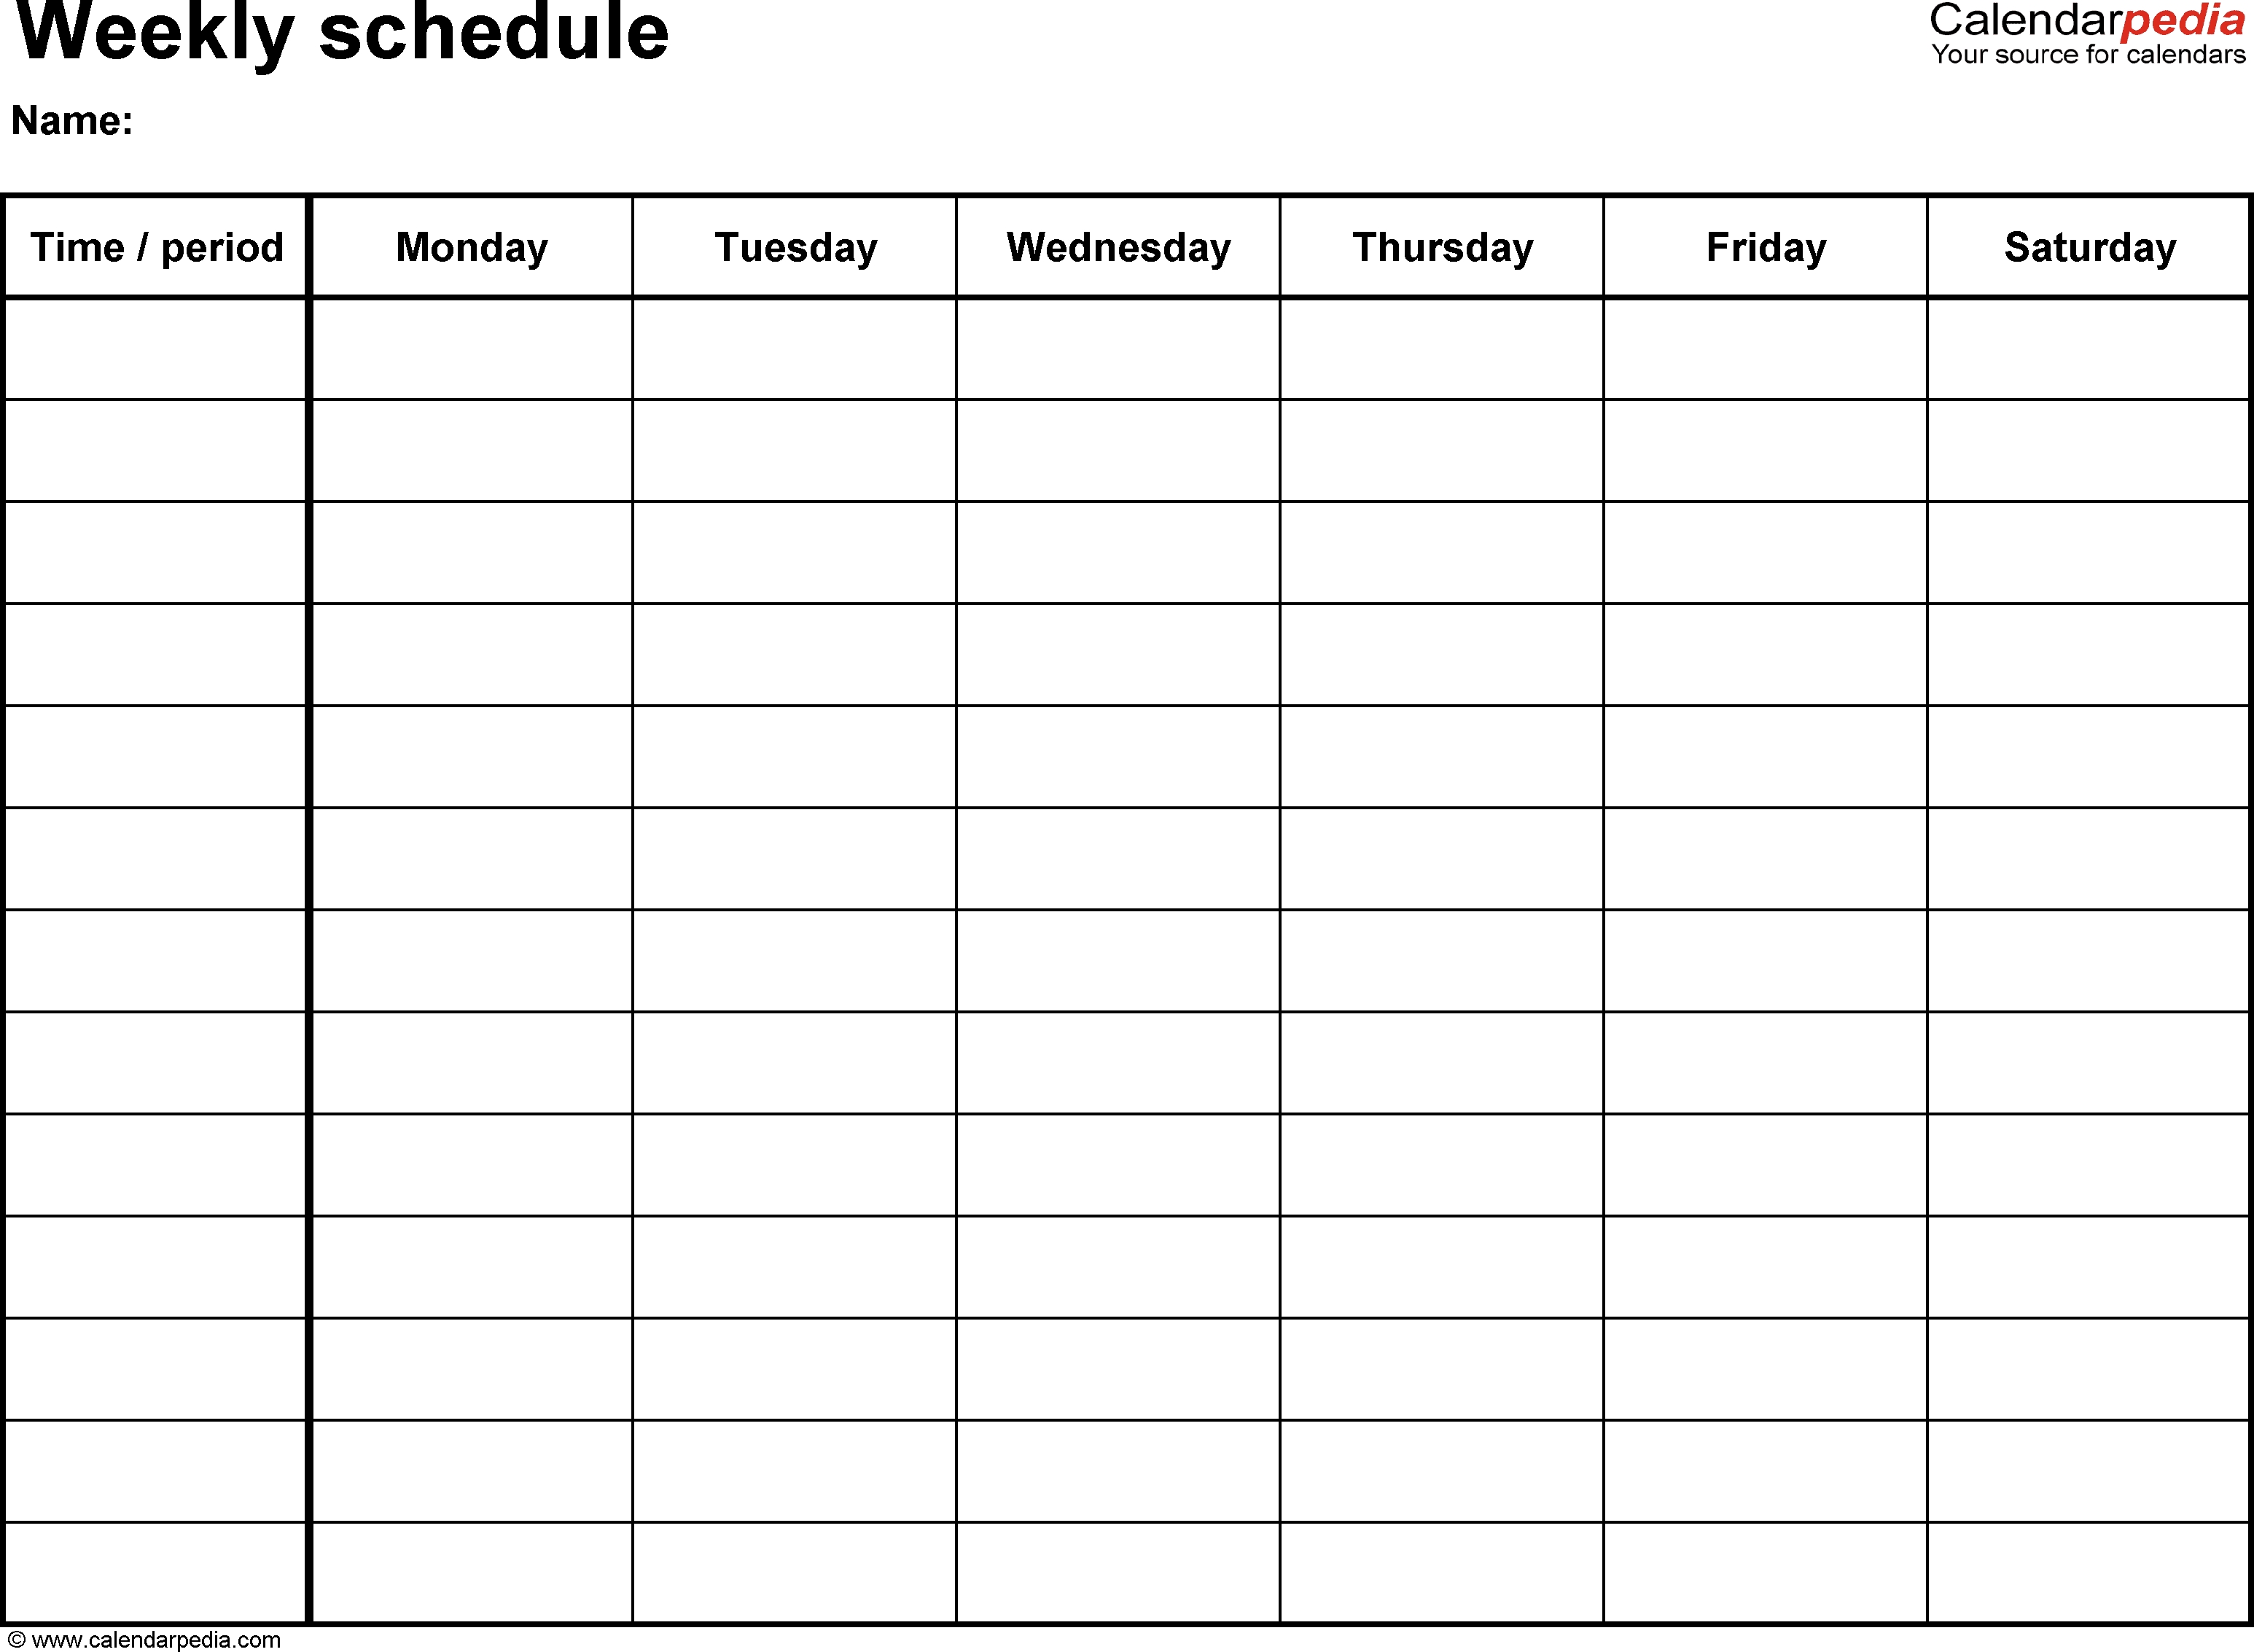 Free Weekly Schedule Templates For Word - 18 Templates for Blank Calendar Template Monday Friday